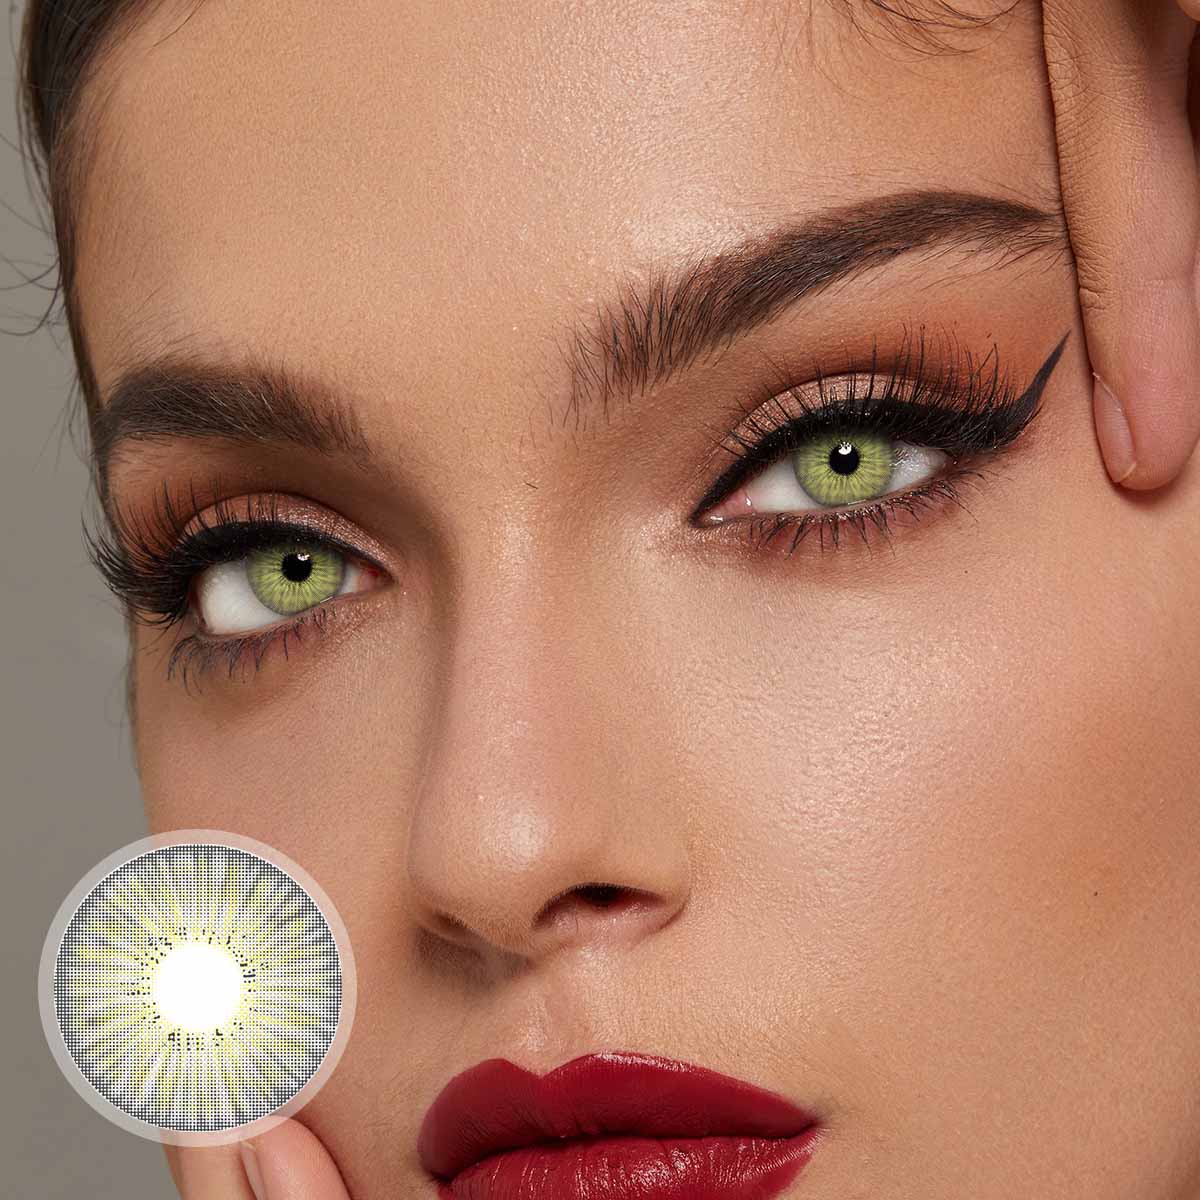 [US Warehouse] New York Grey Prescription Monthly Colored Contacts